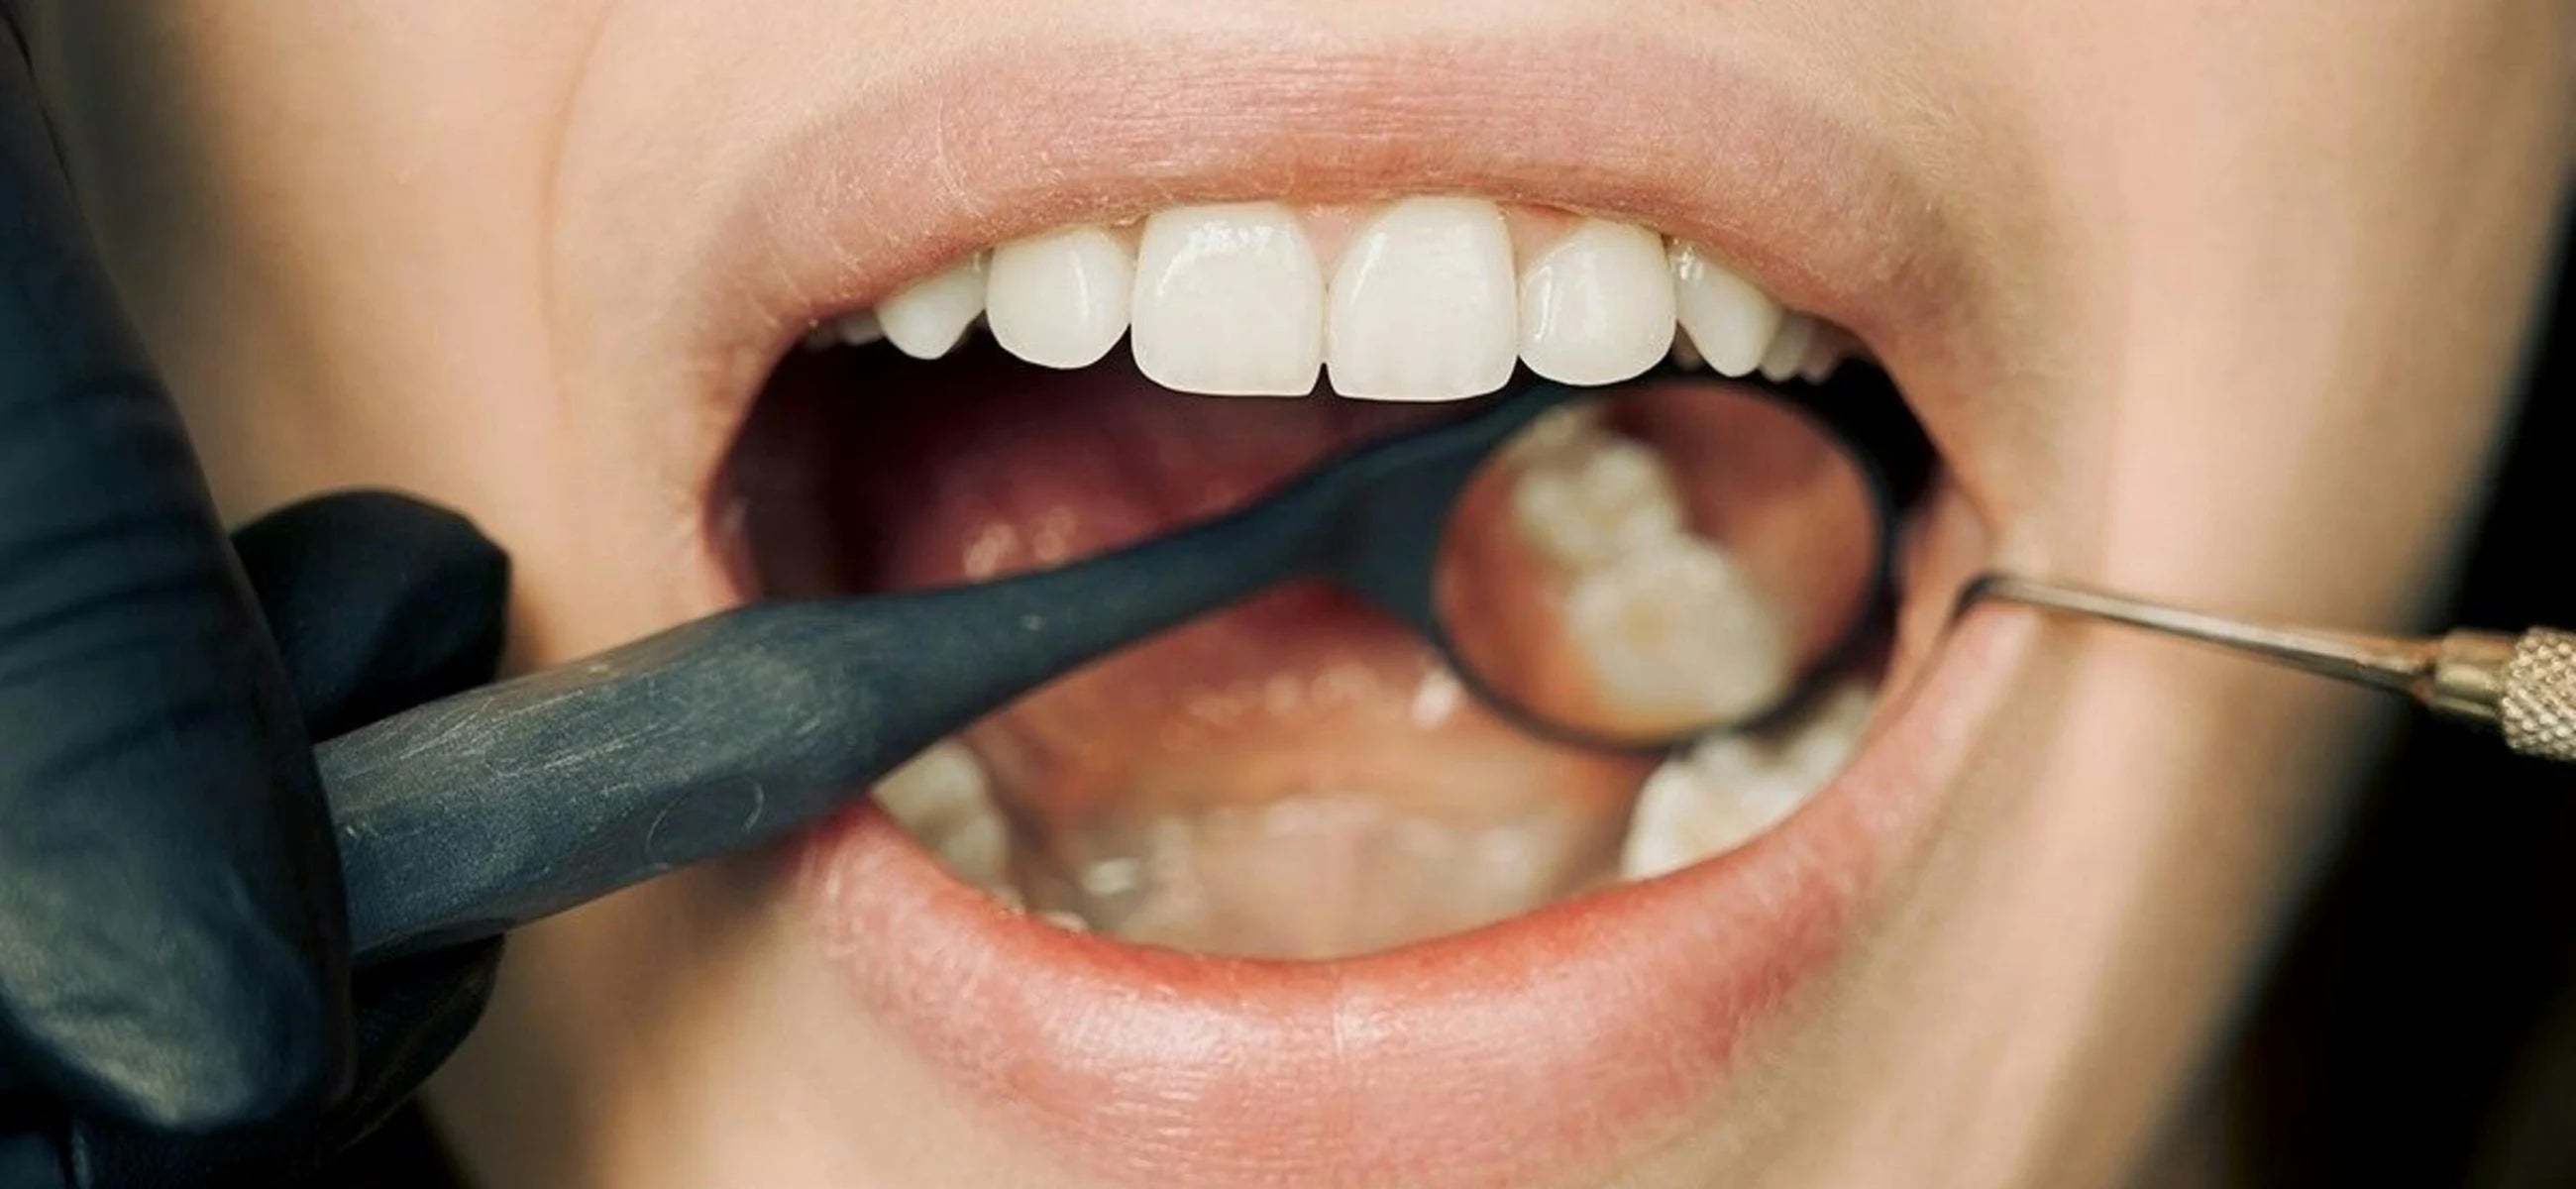 How to have good oral hygiene